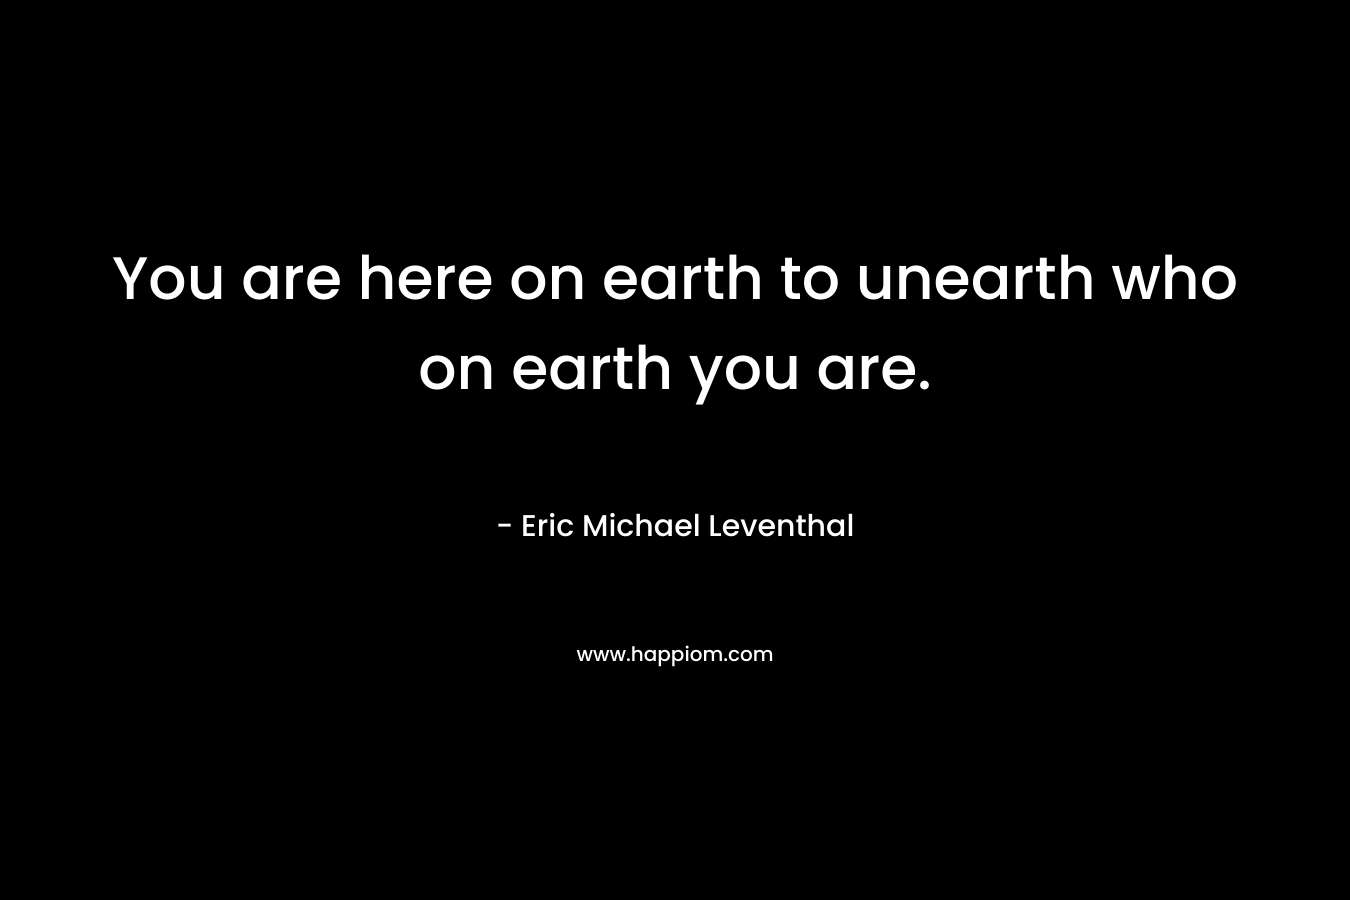 You are here on earth to unearth who on earth you are.